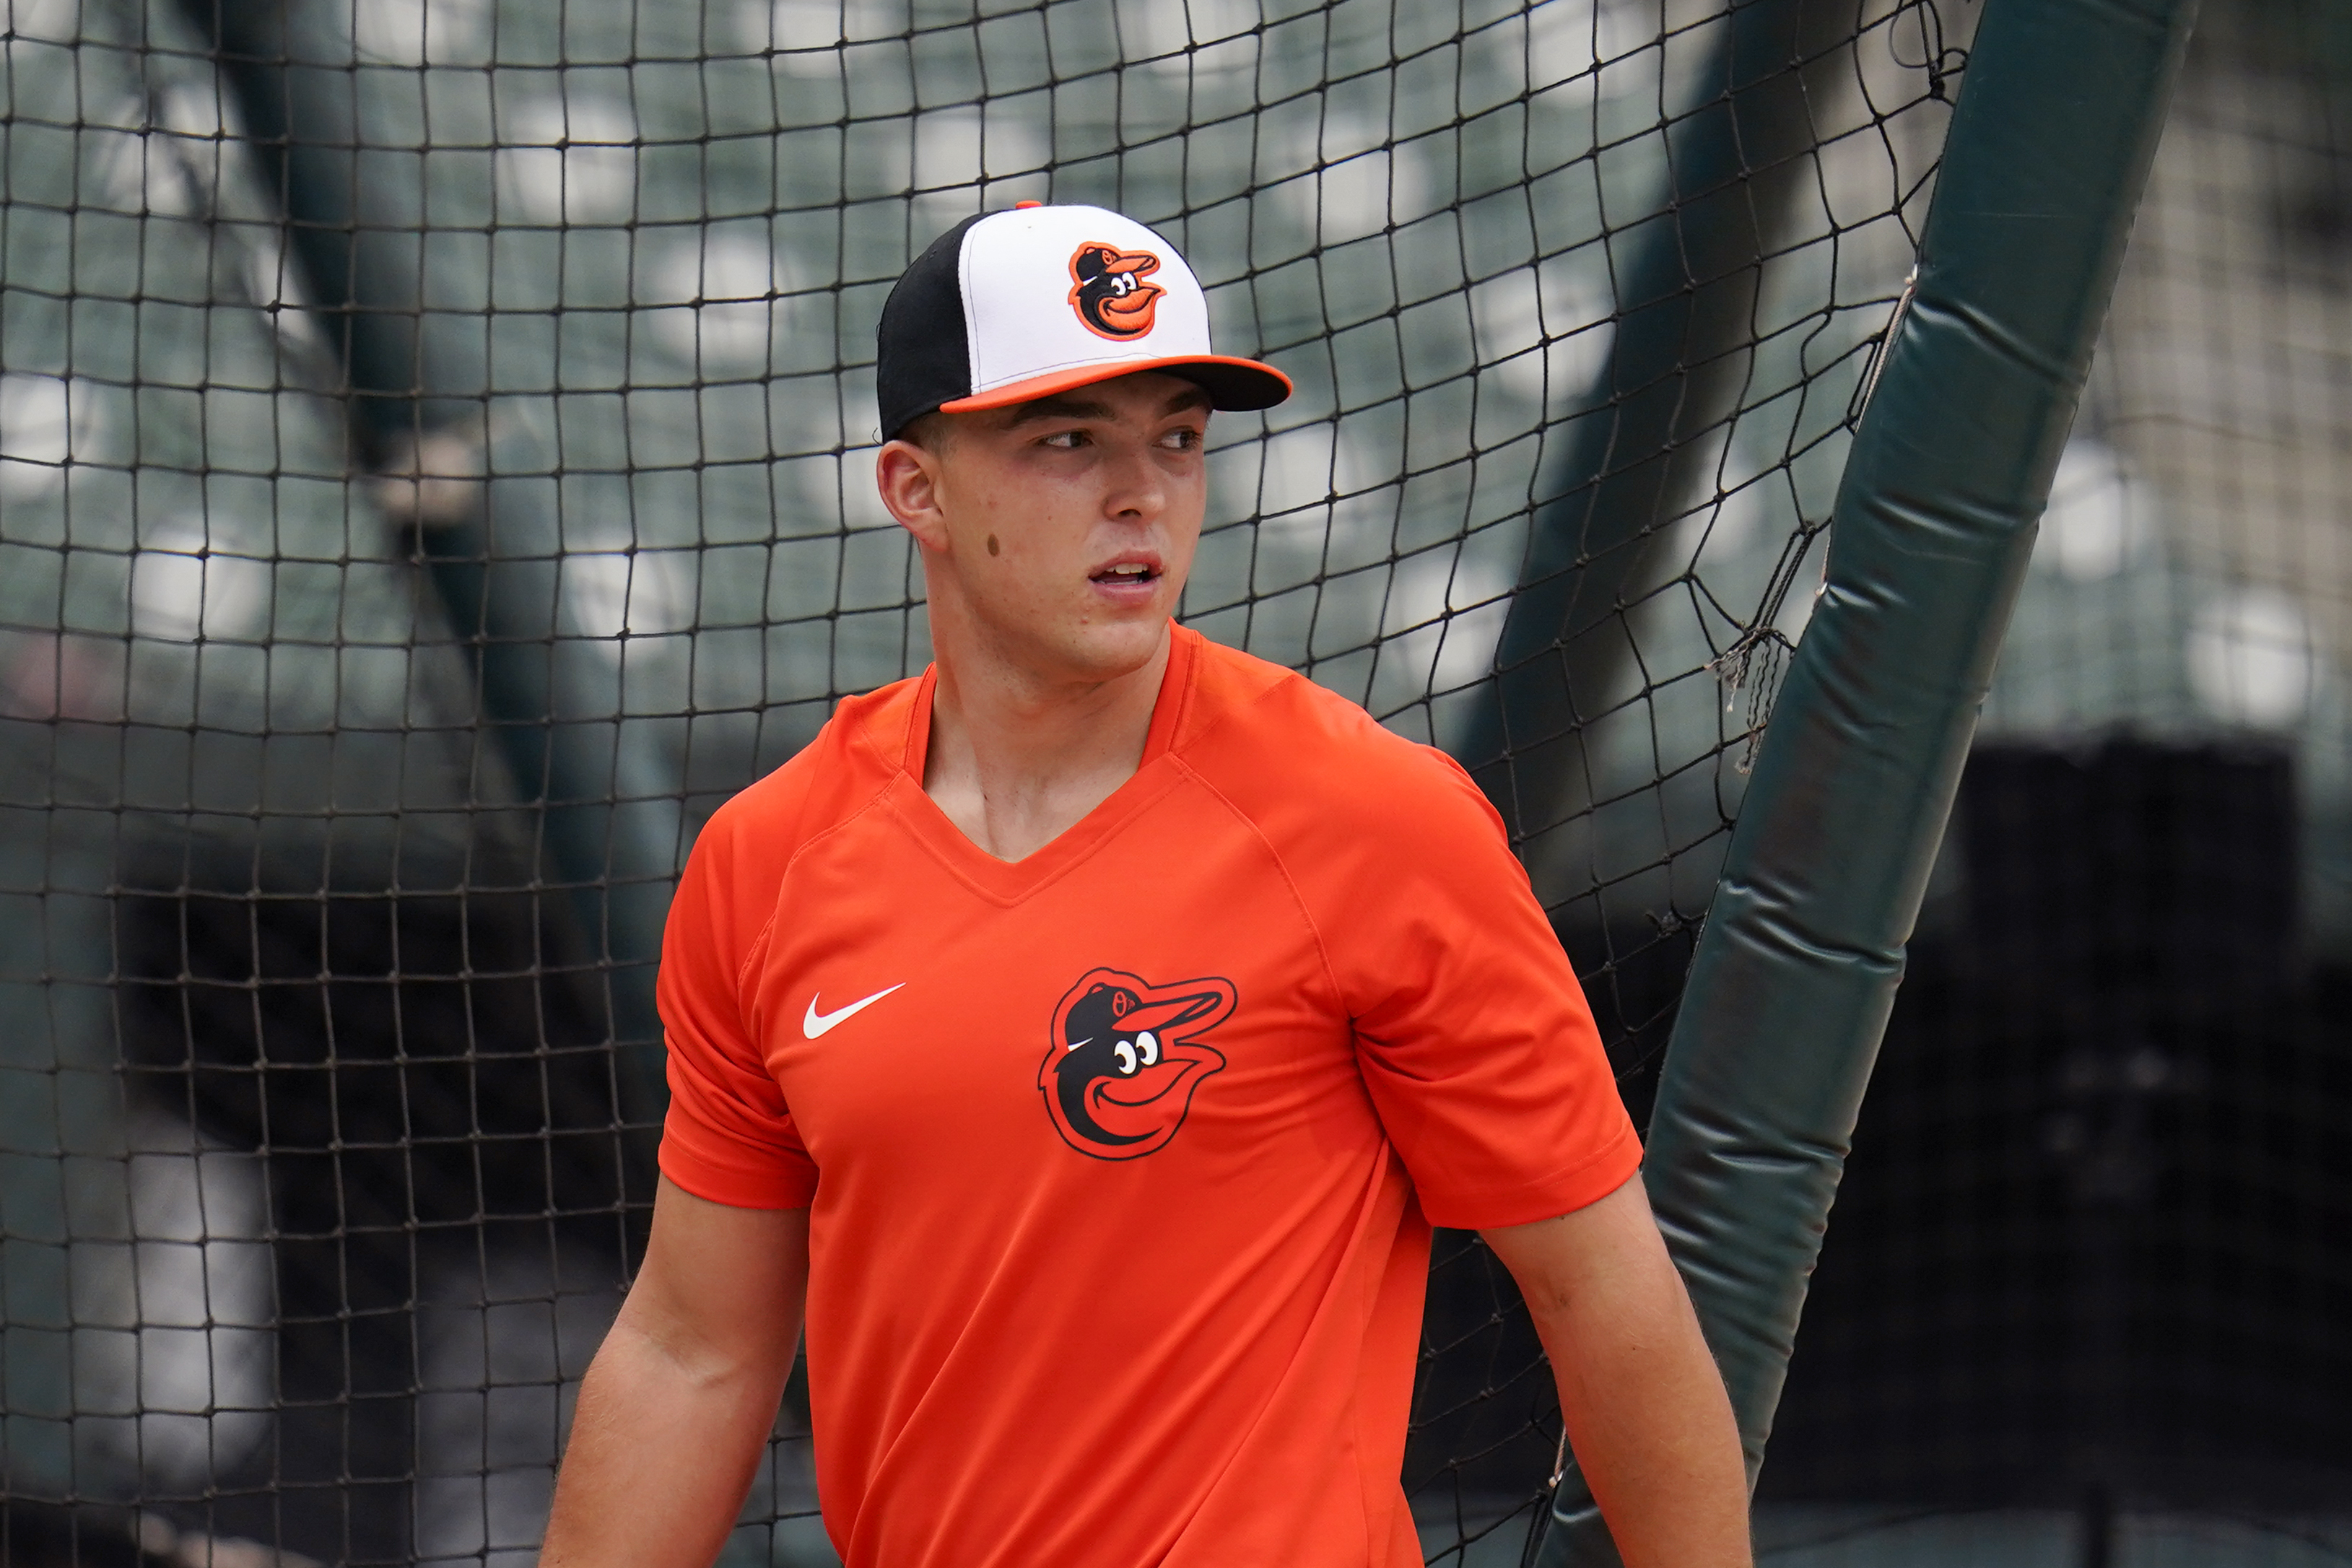 Green Bay Preble's Max Wagner of Clemson drafted by Baltimore Orioles